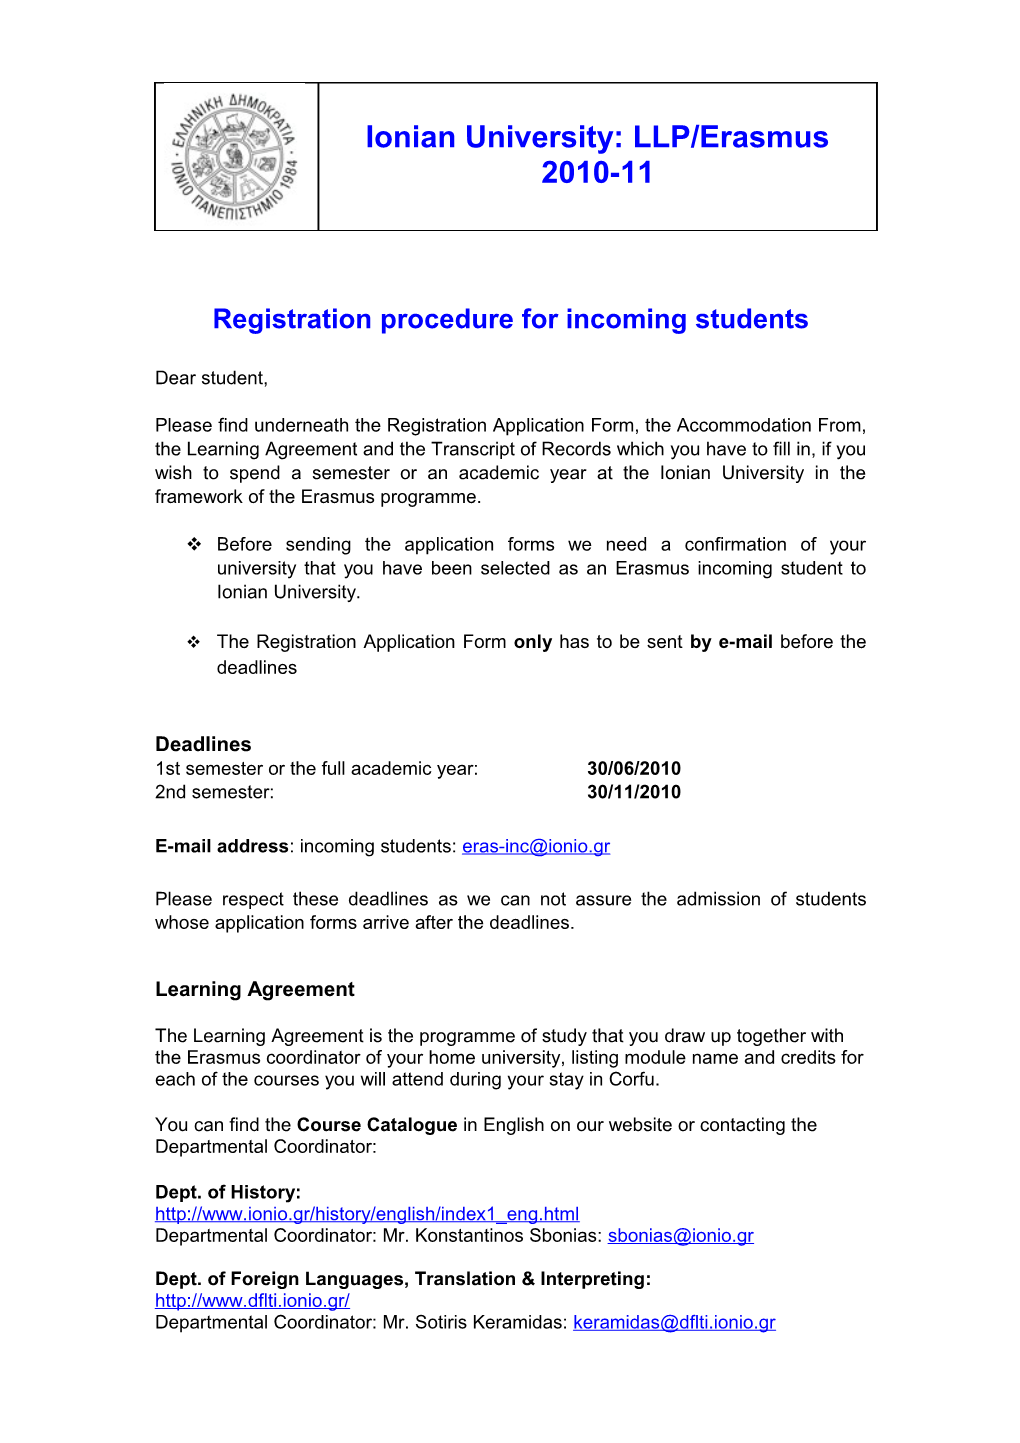 Registration Procedure for Incoming Students